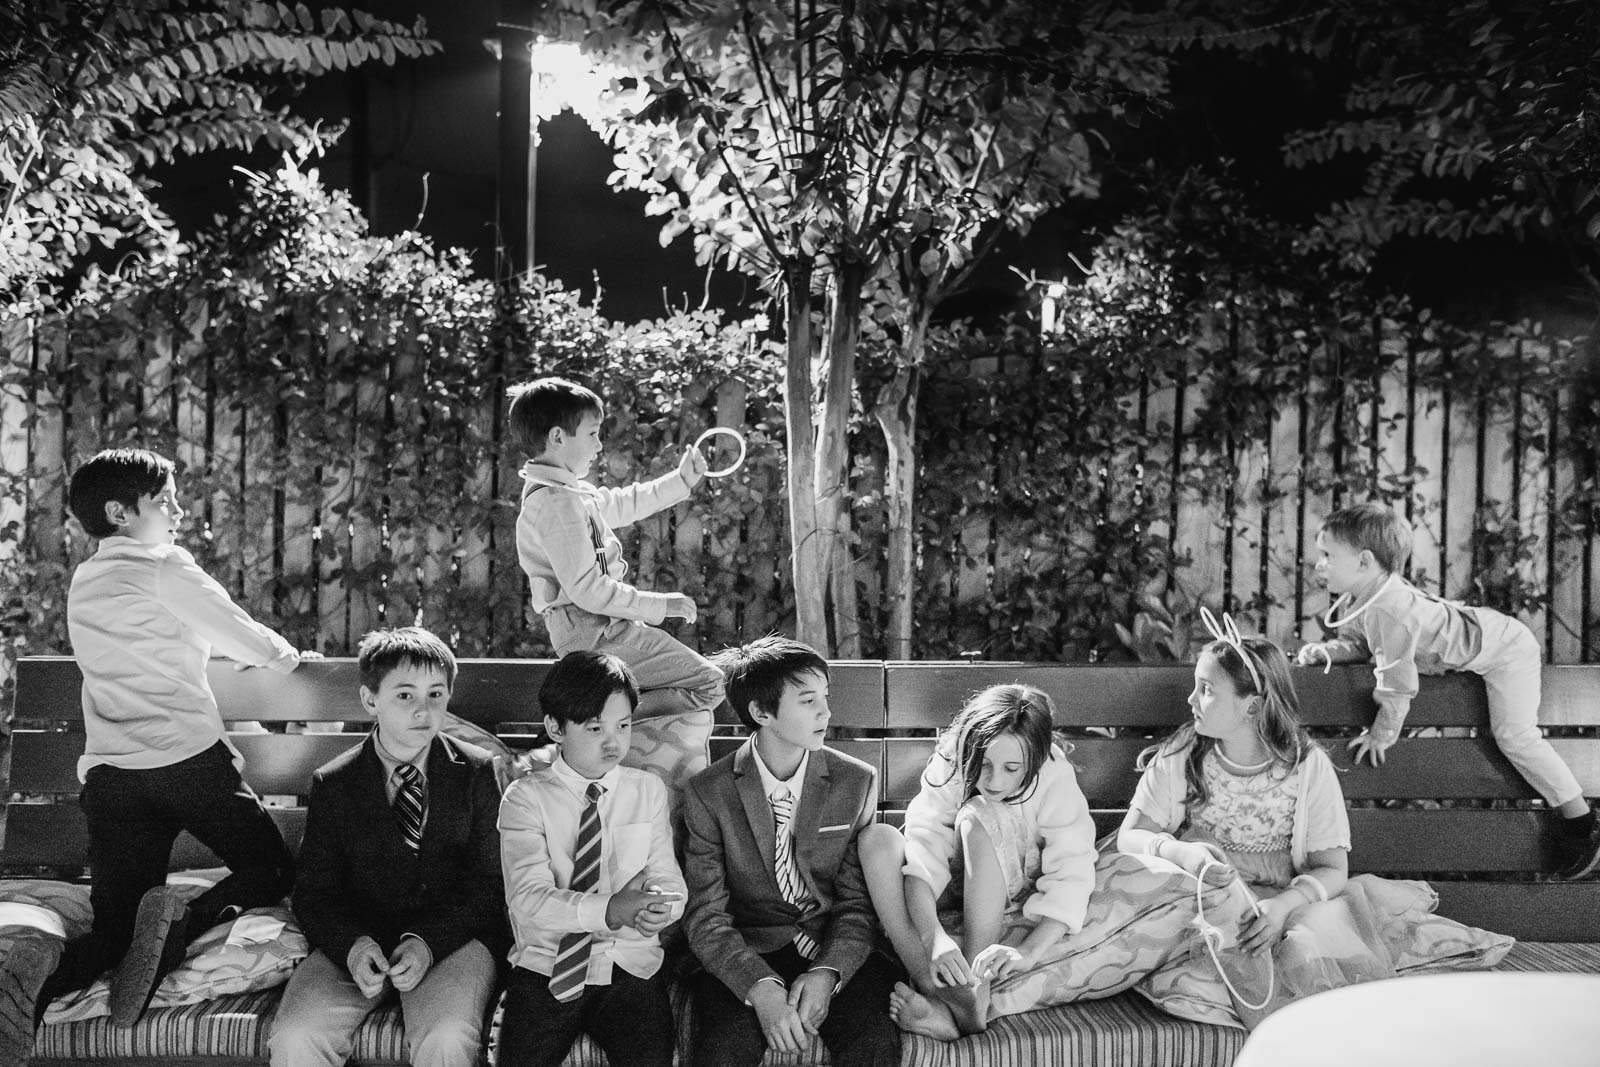 Children of families at Martin and Katie tied the knot at the Cathedral of Our Lady of Walsingham, and their reception was at Ouisie's Table in Houston. have a fun moment. Inspired by Henri Cartier-Bresson.